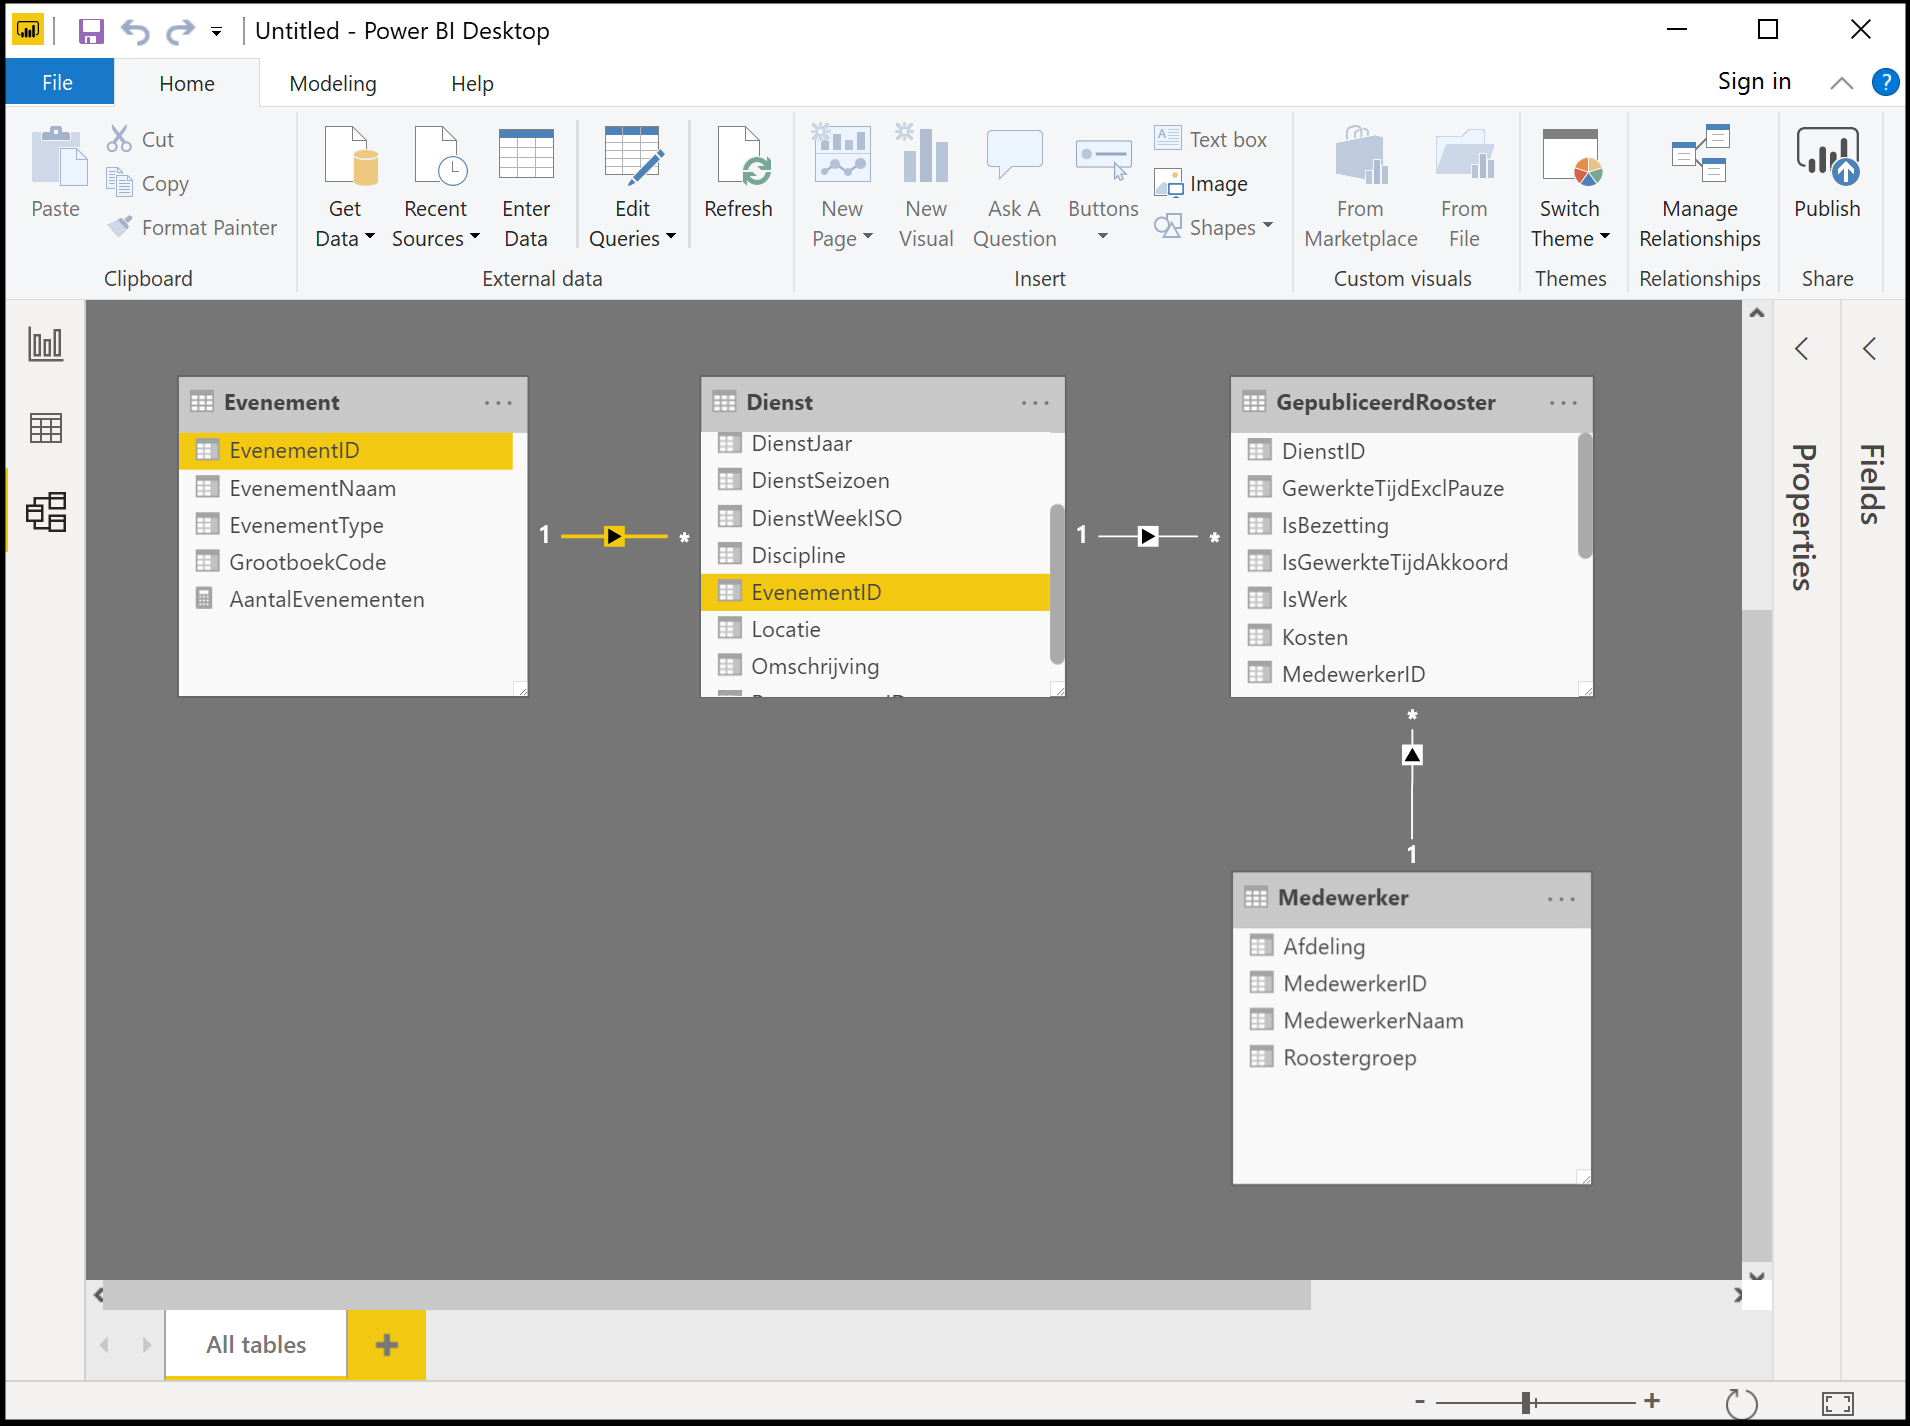 powerbi-crossfilter-direction-2-35cc5fbaad3e8bc790534545460e92a2.png